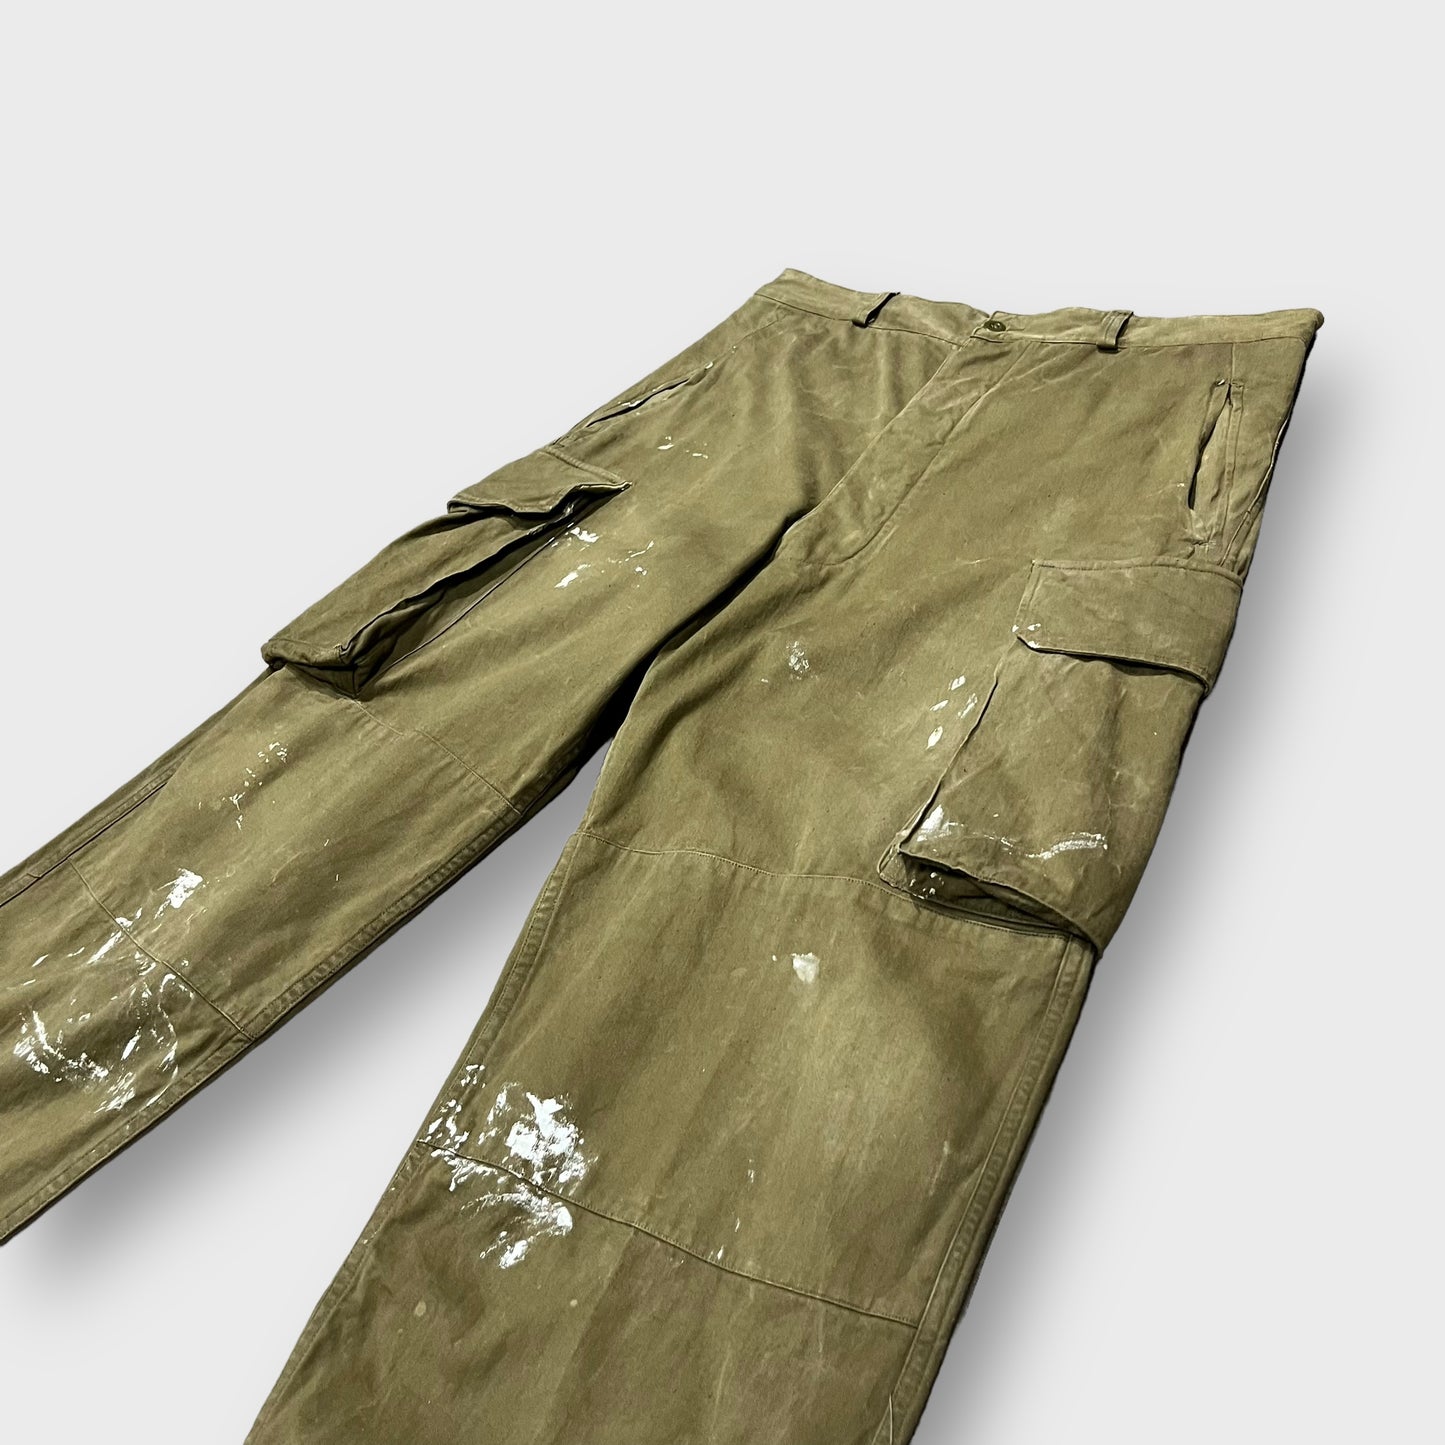 60’s french army m-47
cargo pants